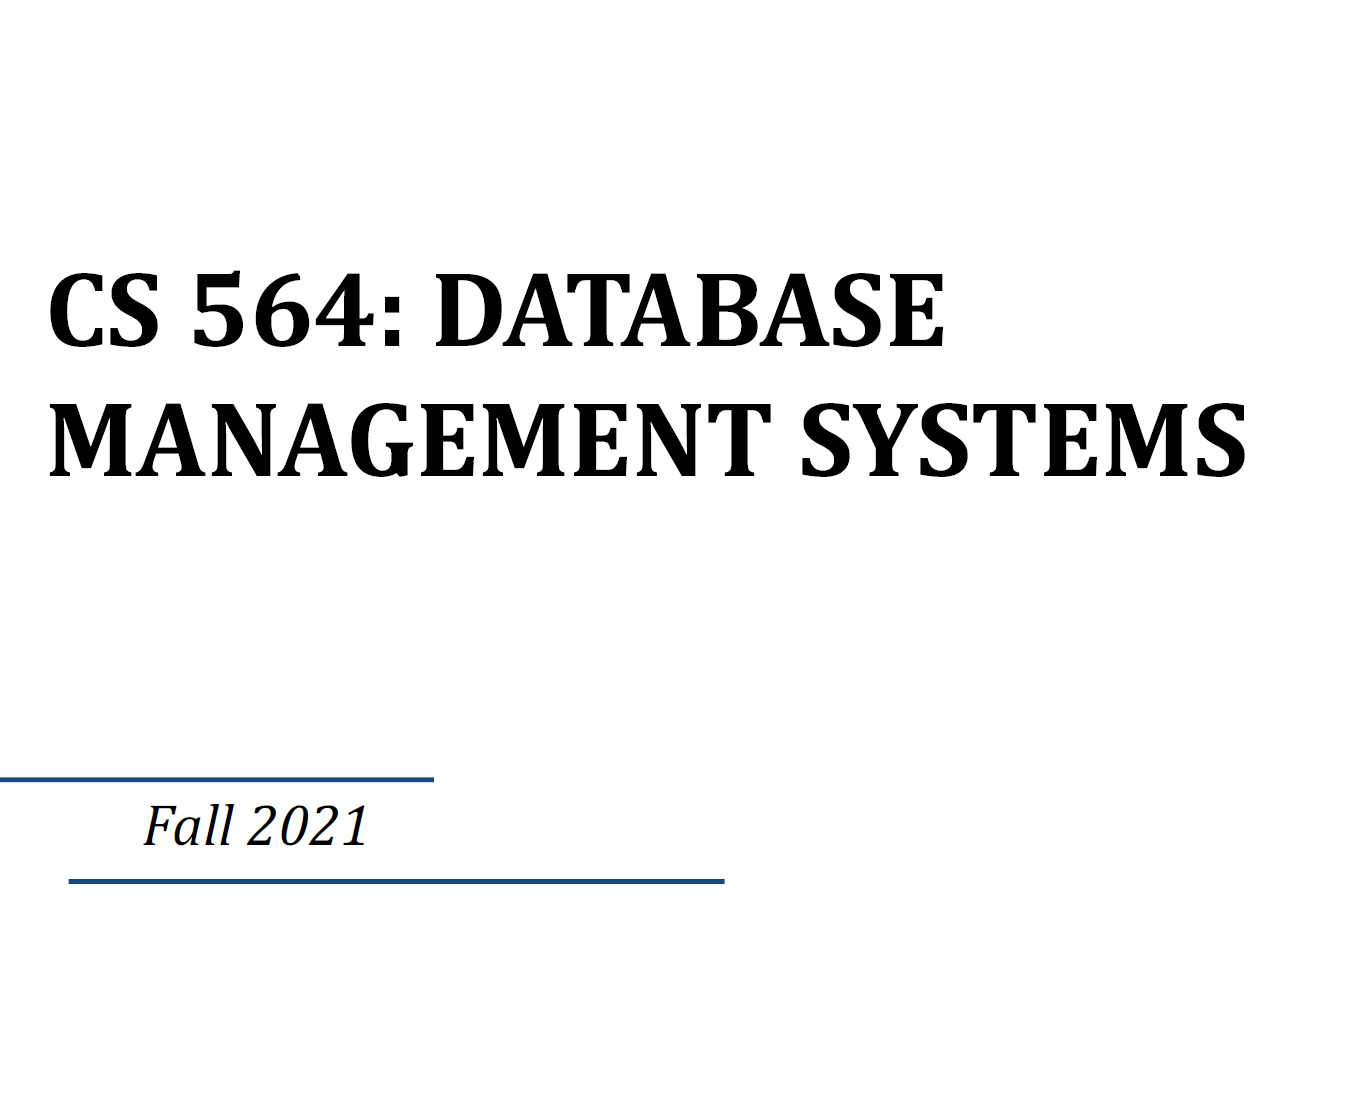 Database Management Systems: Design and Implementation